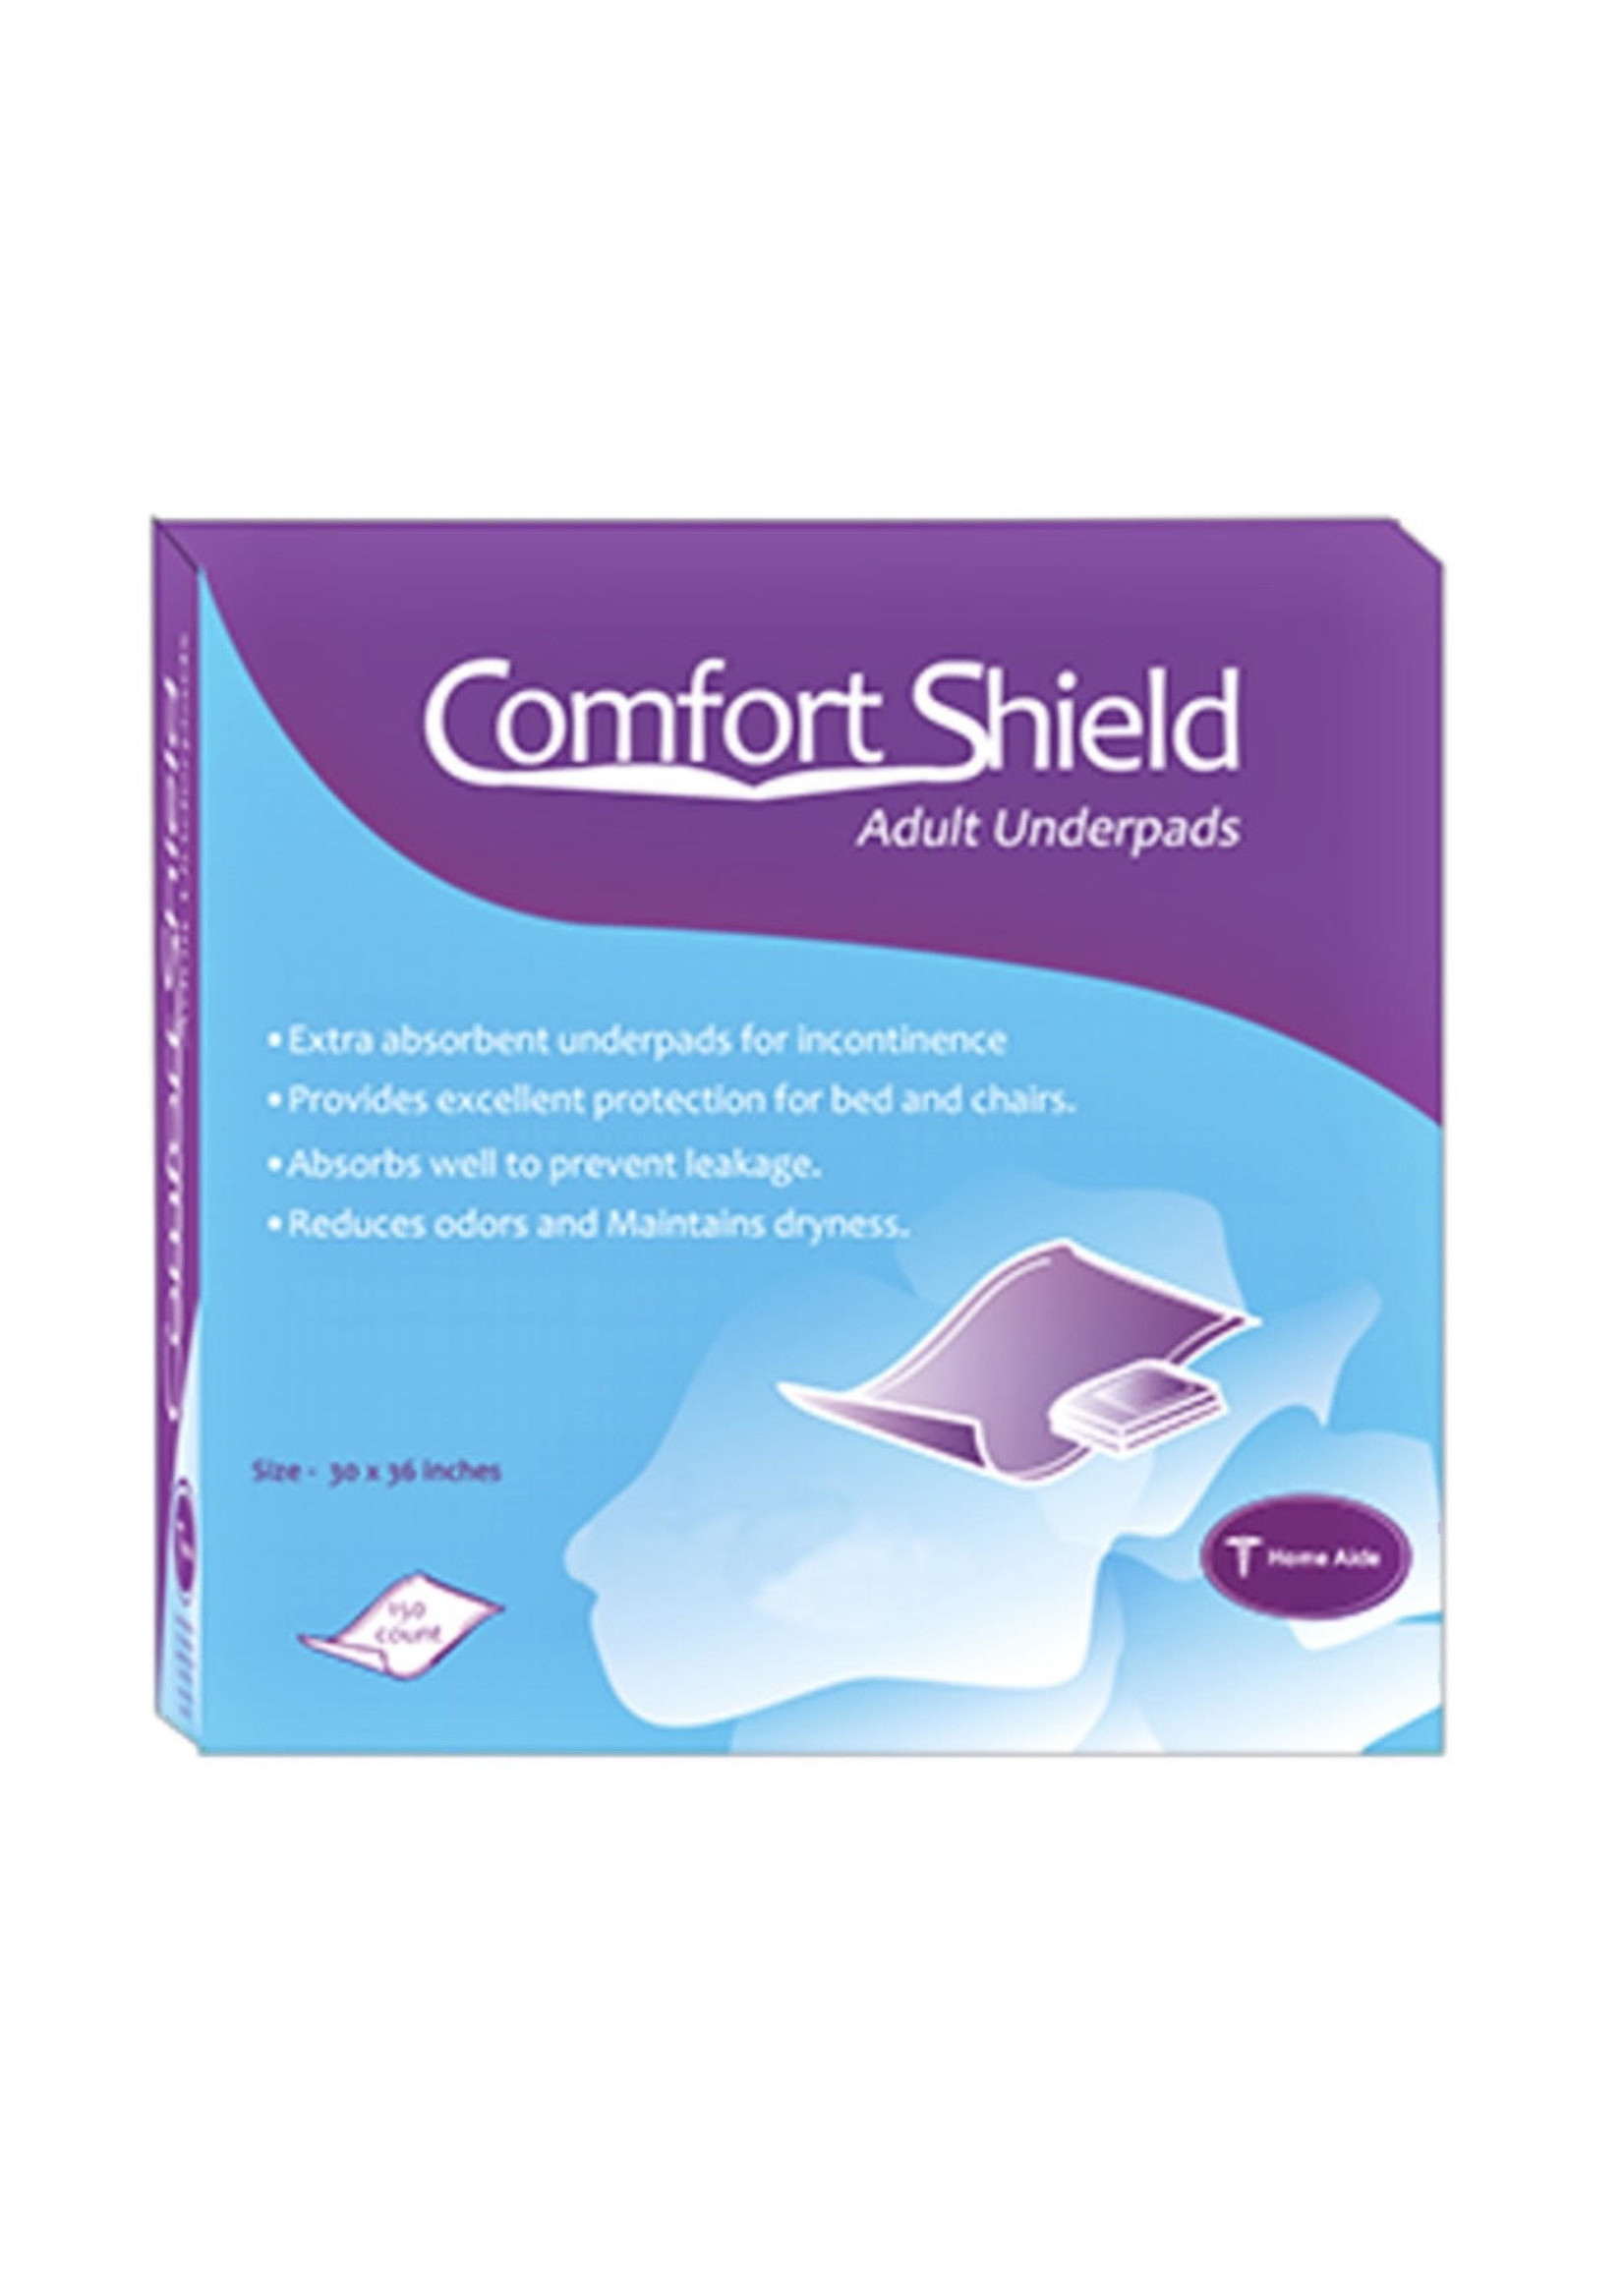 Home Aide Comfort Shield Adult Underpads - NDC# 91237-0001-53